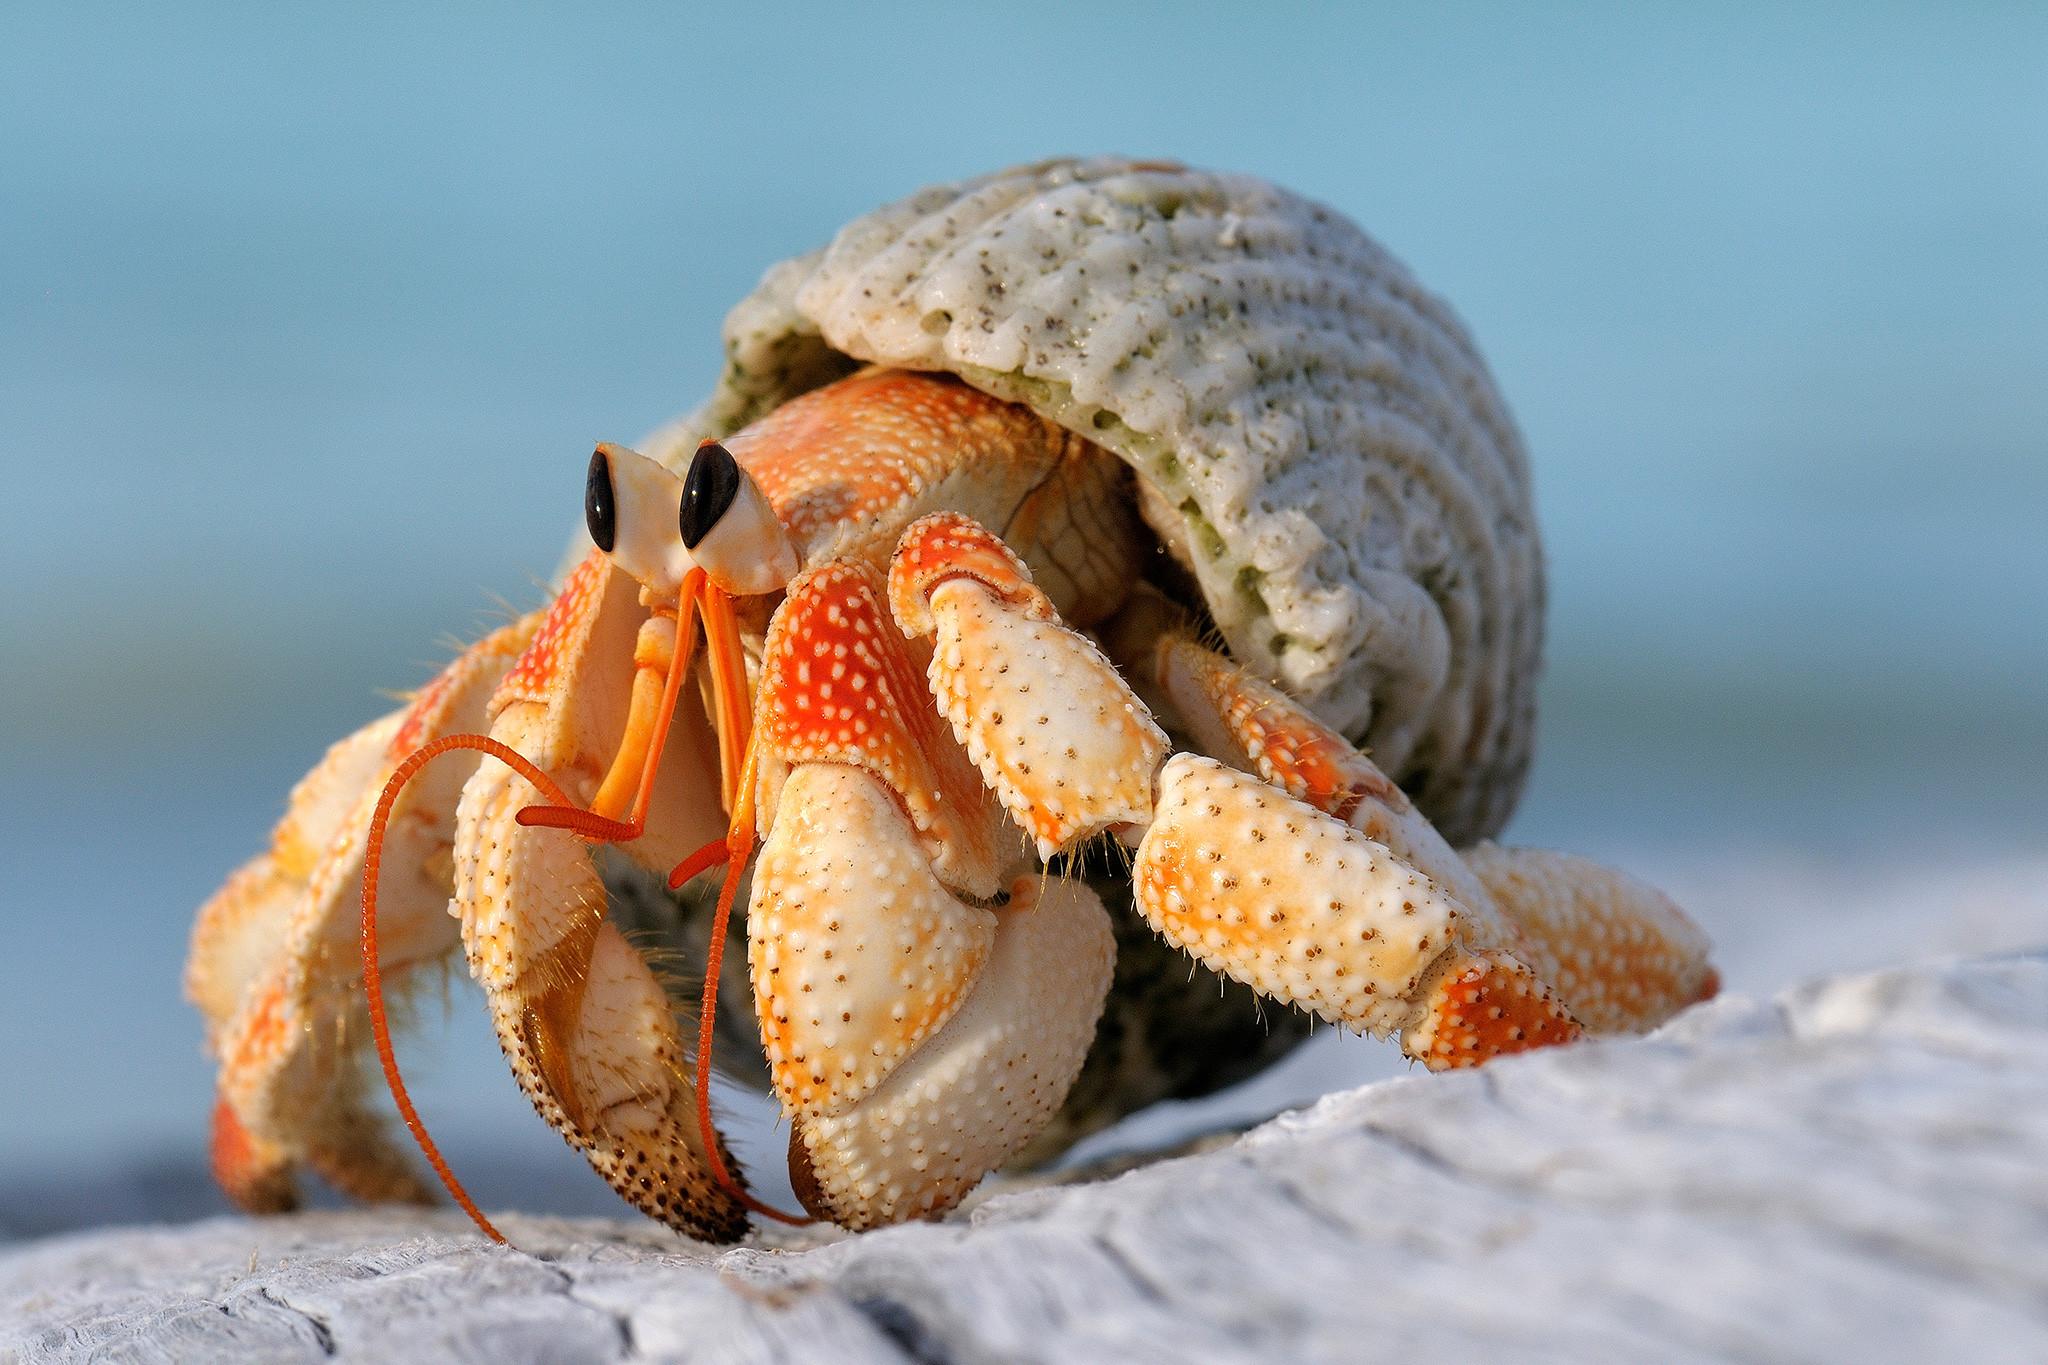 Male hermit crabs evolved larger sex organs to avoid losing homes